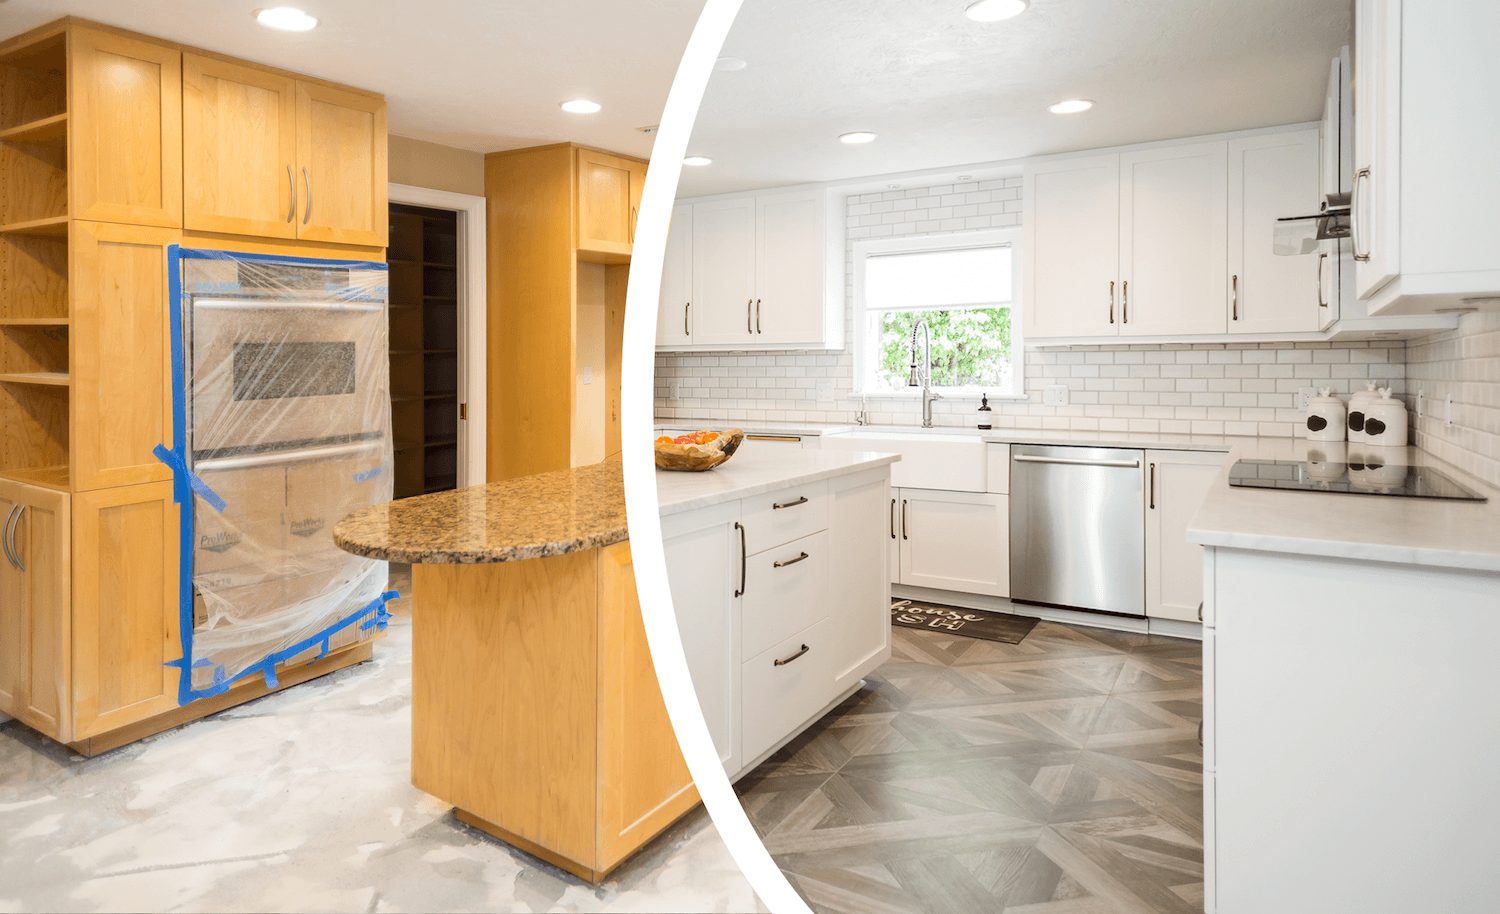 https://www.nhance.com/wp-content/themes/nhance2022/content-images/2019/01/White-Kitchen-remodel-Jacksonville-FL.png